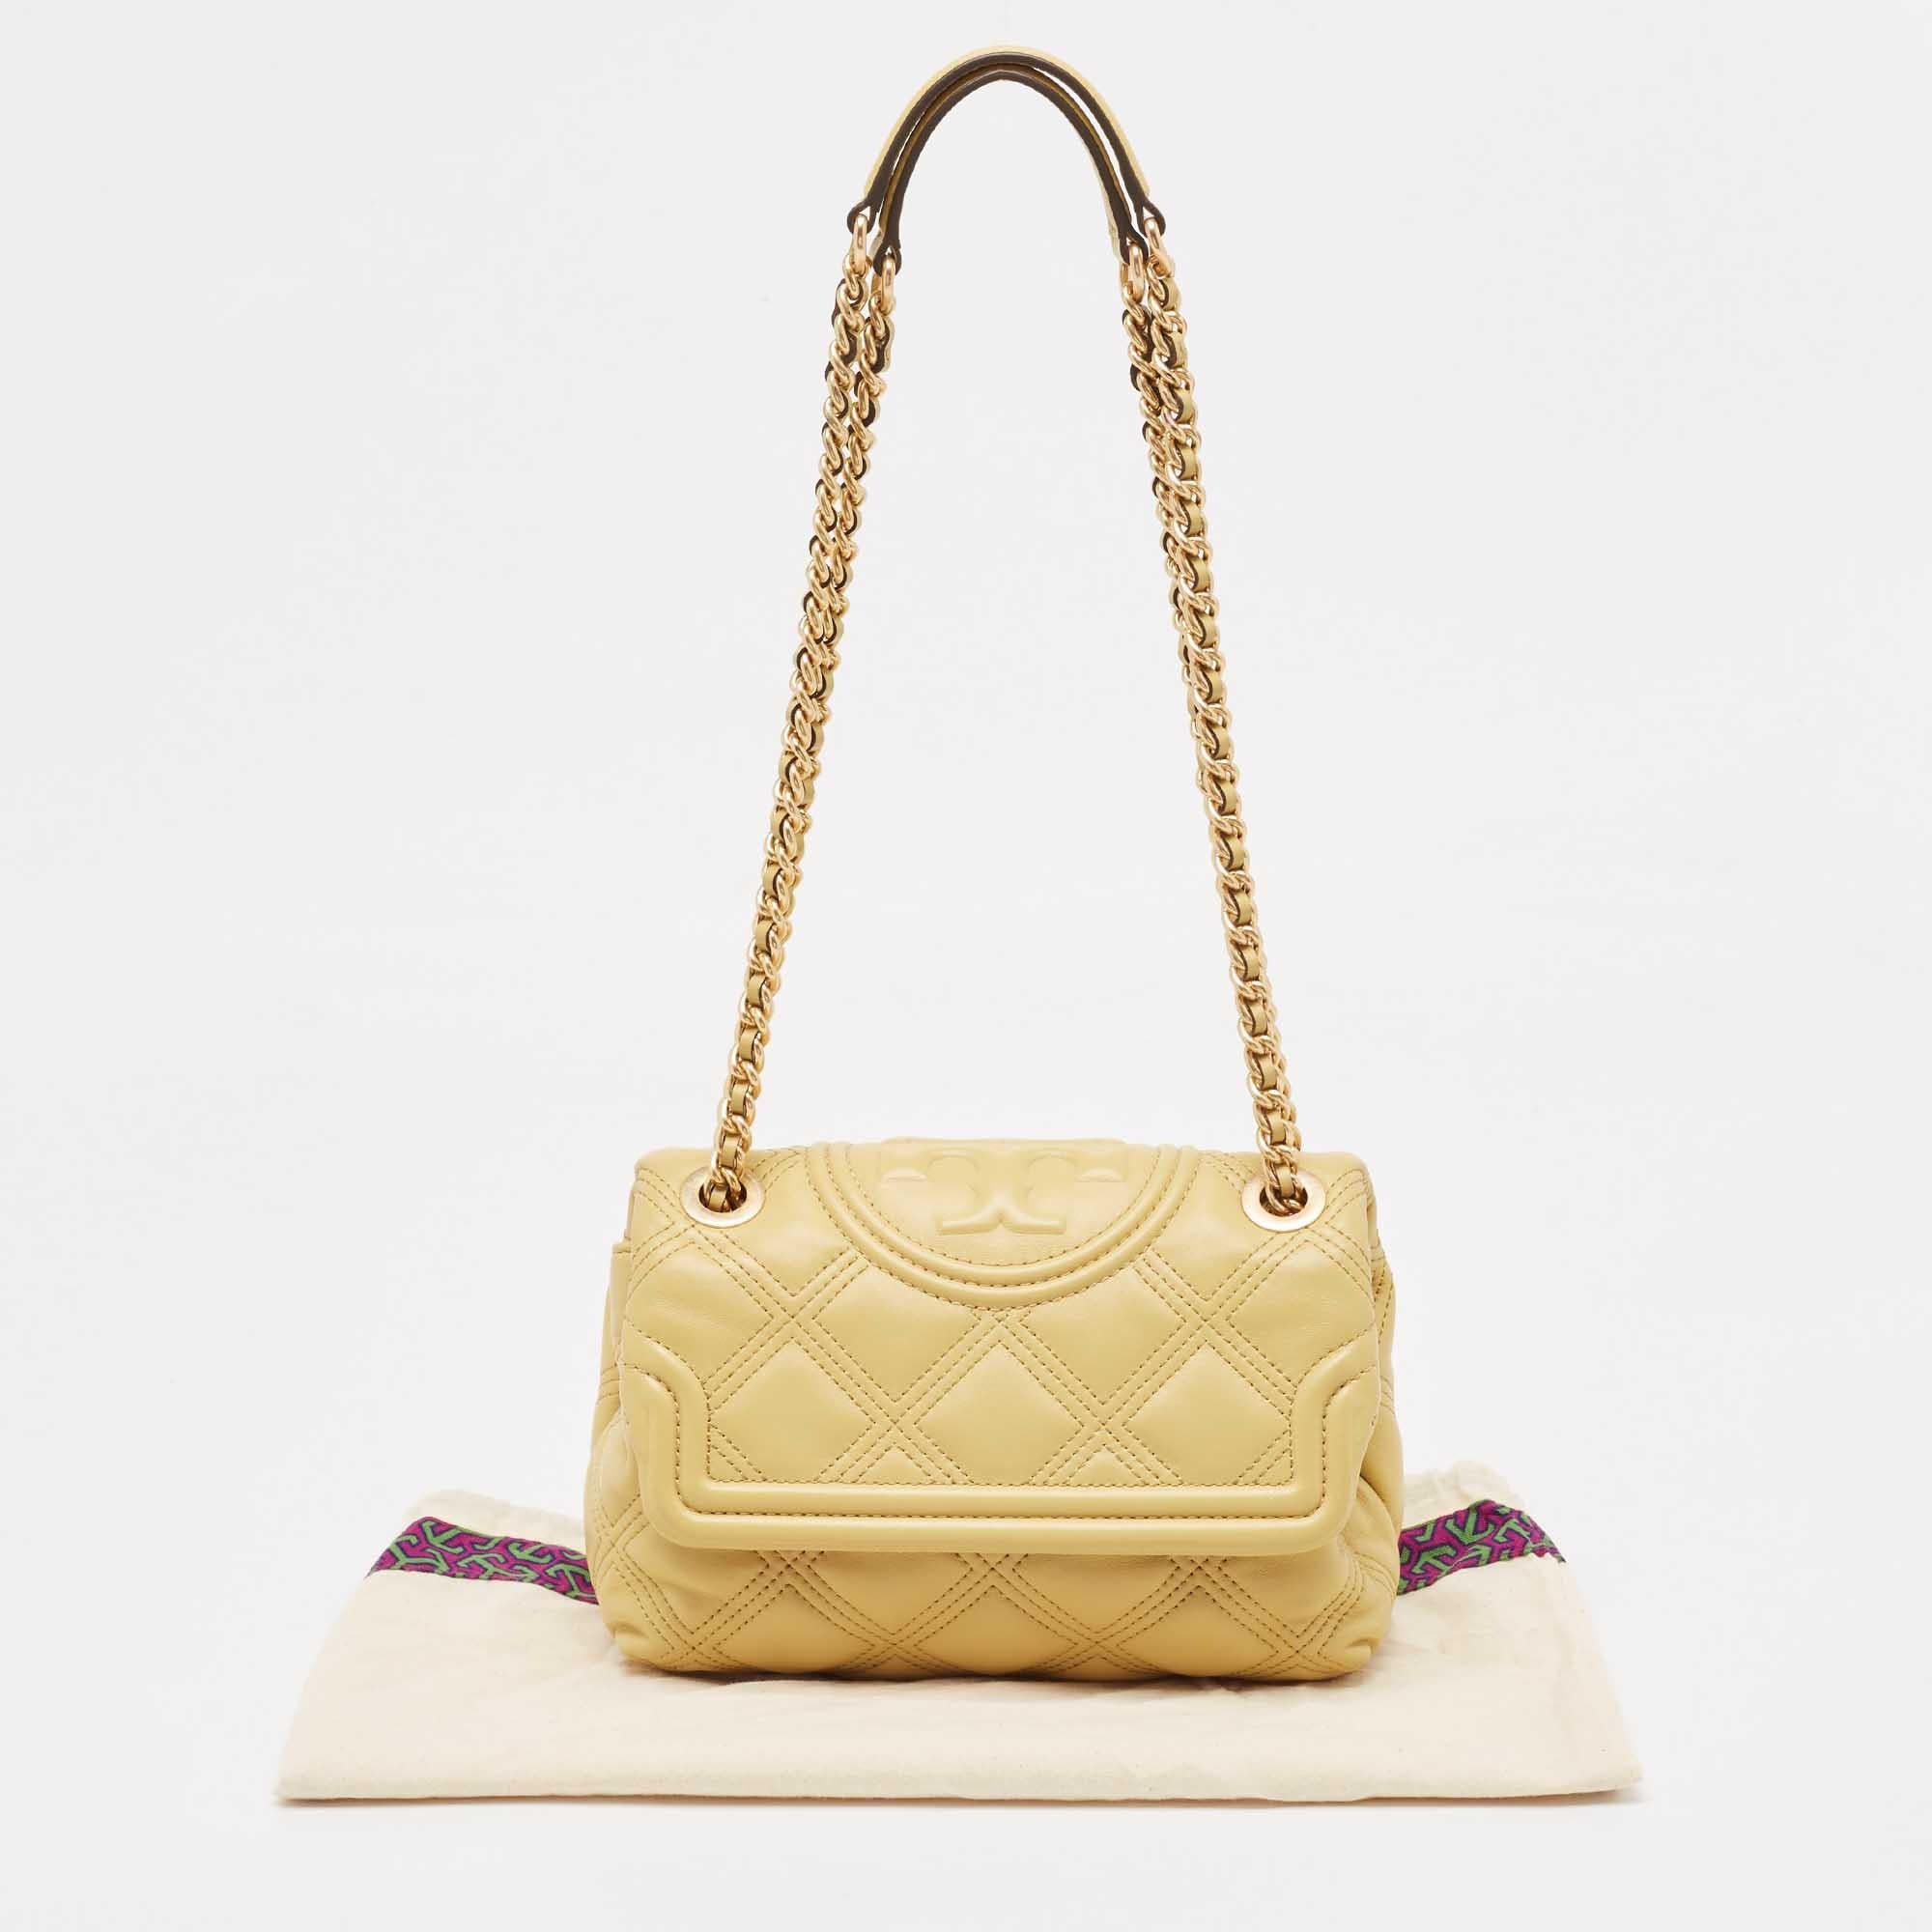 Tory Burch Yellow Leather Fleming Shoulder Bag In Excellent Condition For Sale In Dubai, Al Qouz 2